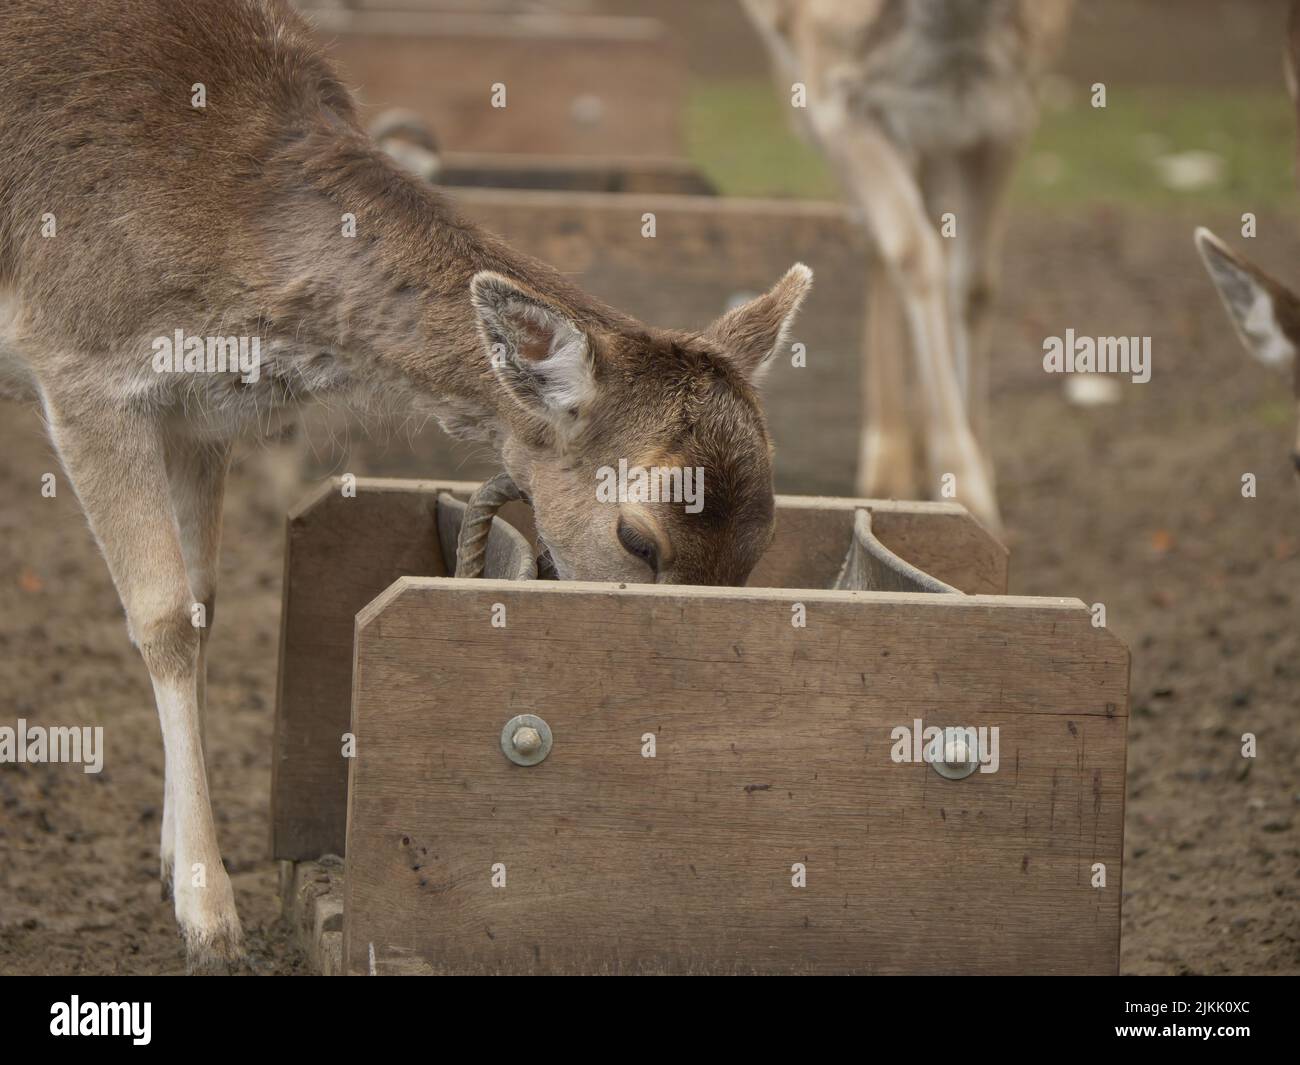 A closeup shot of the deer eating in the zoo on yhe blurred background Stock Photo